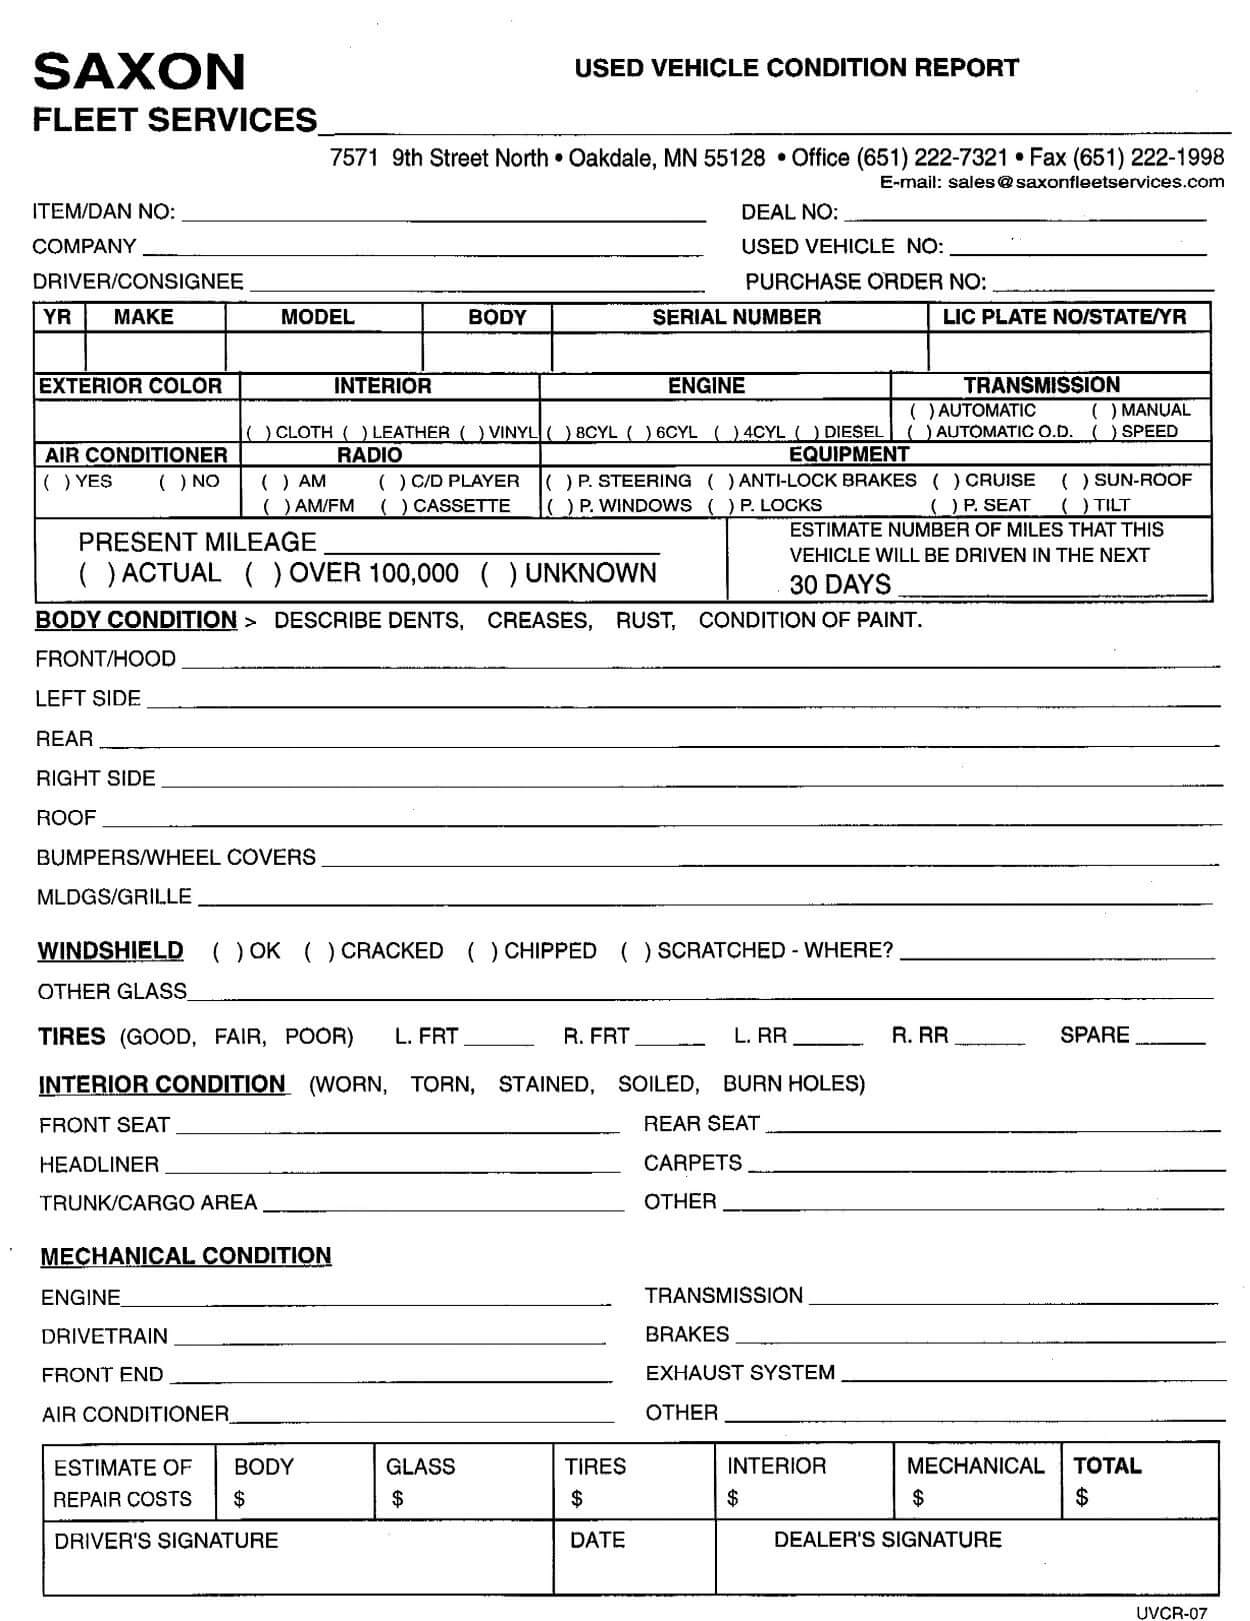 18 Images Of Truck Condition Report Template | Masorler Intended For Truck Condition Report Template